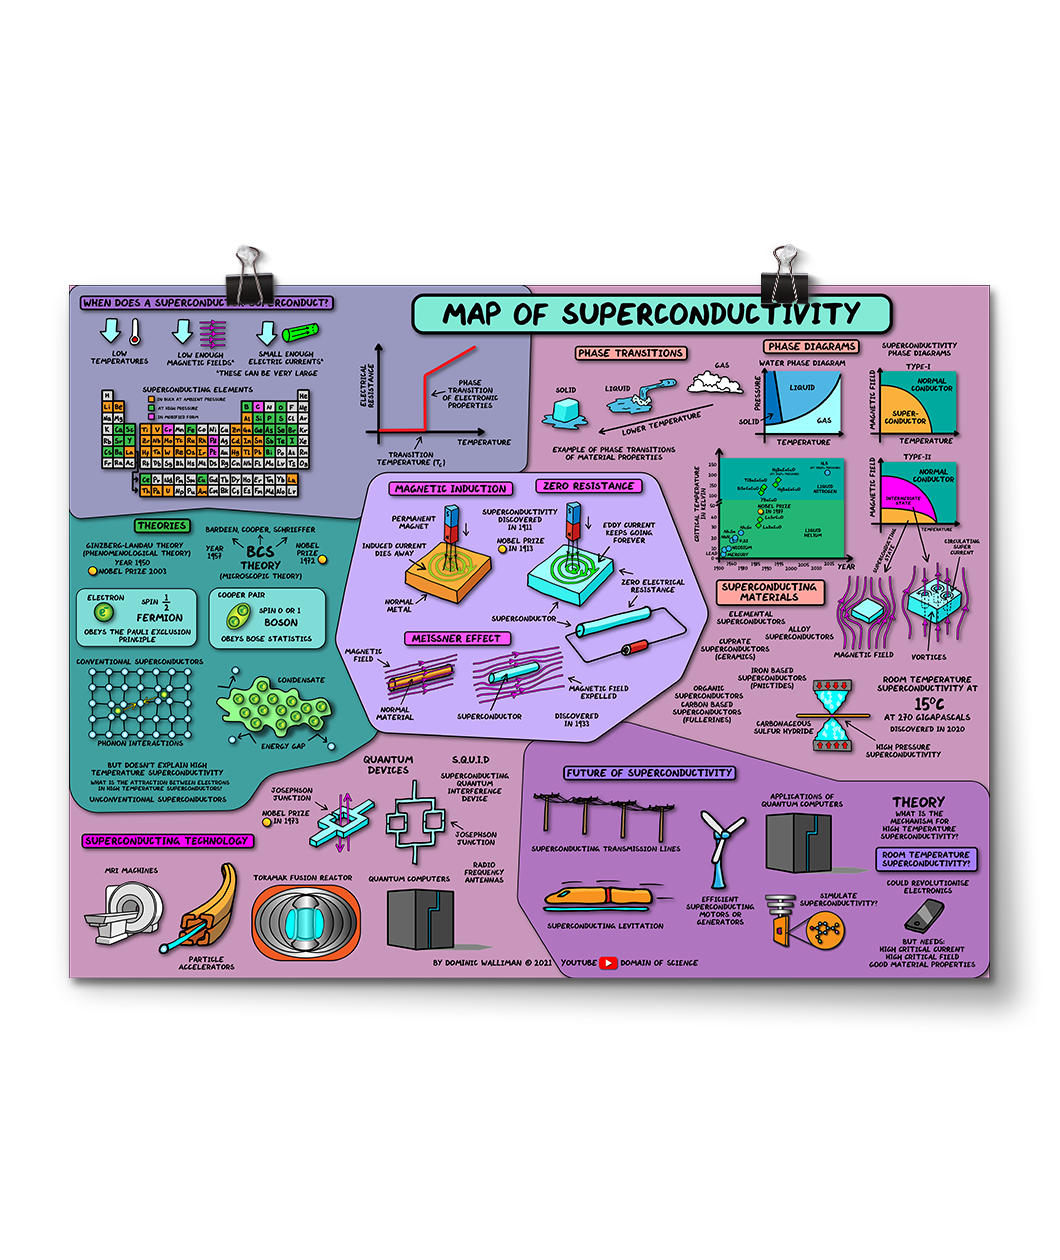 A light-purple and blue poster covered in text and graphics - by Domain of Science